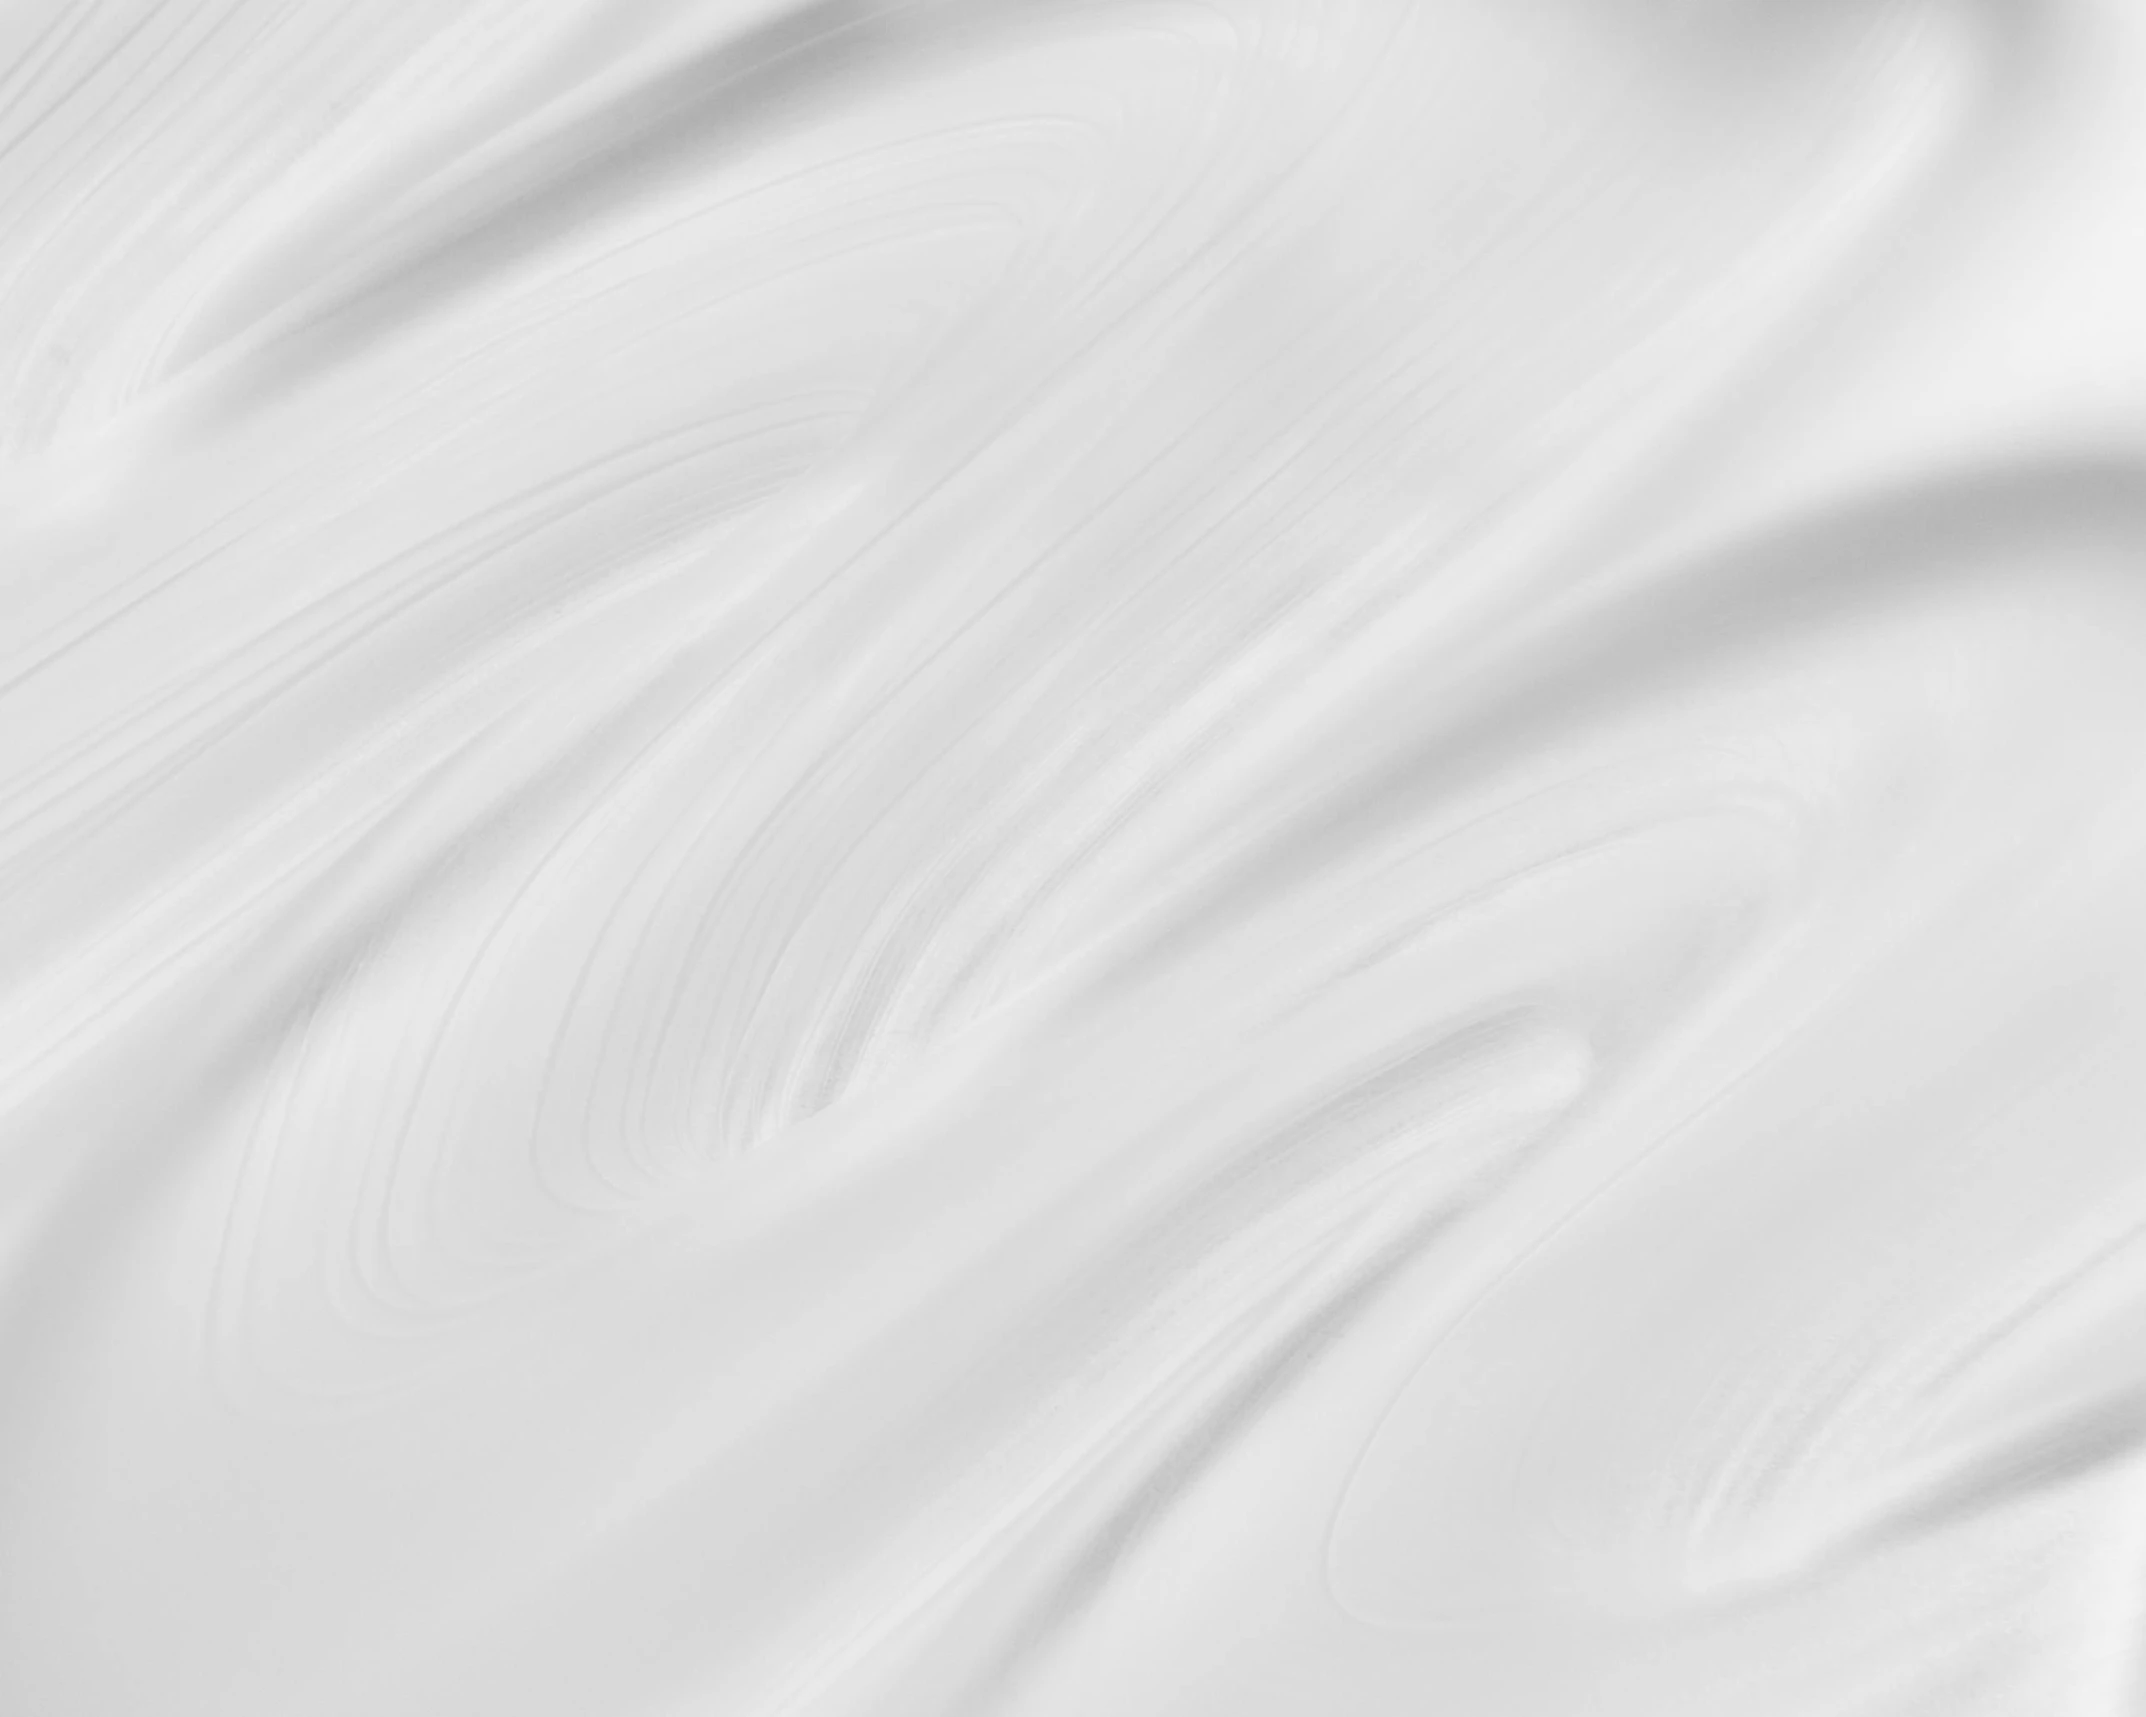 a close up view of a white cloth, an ambient occlusion render, trending on pexels, whipped cream, paint swirl aesthetic, white background : 3, white shiny skin